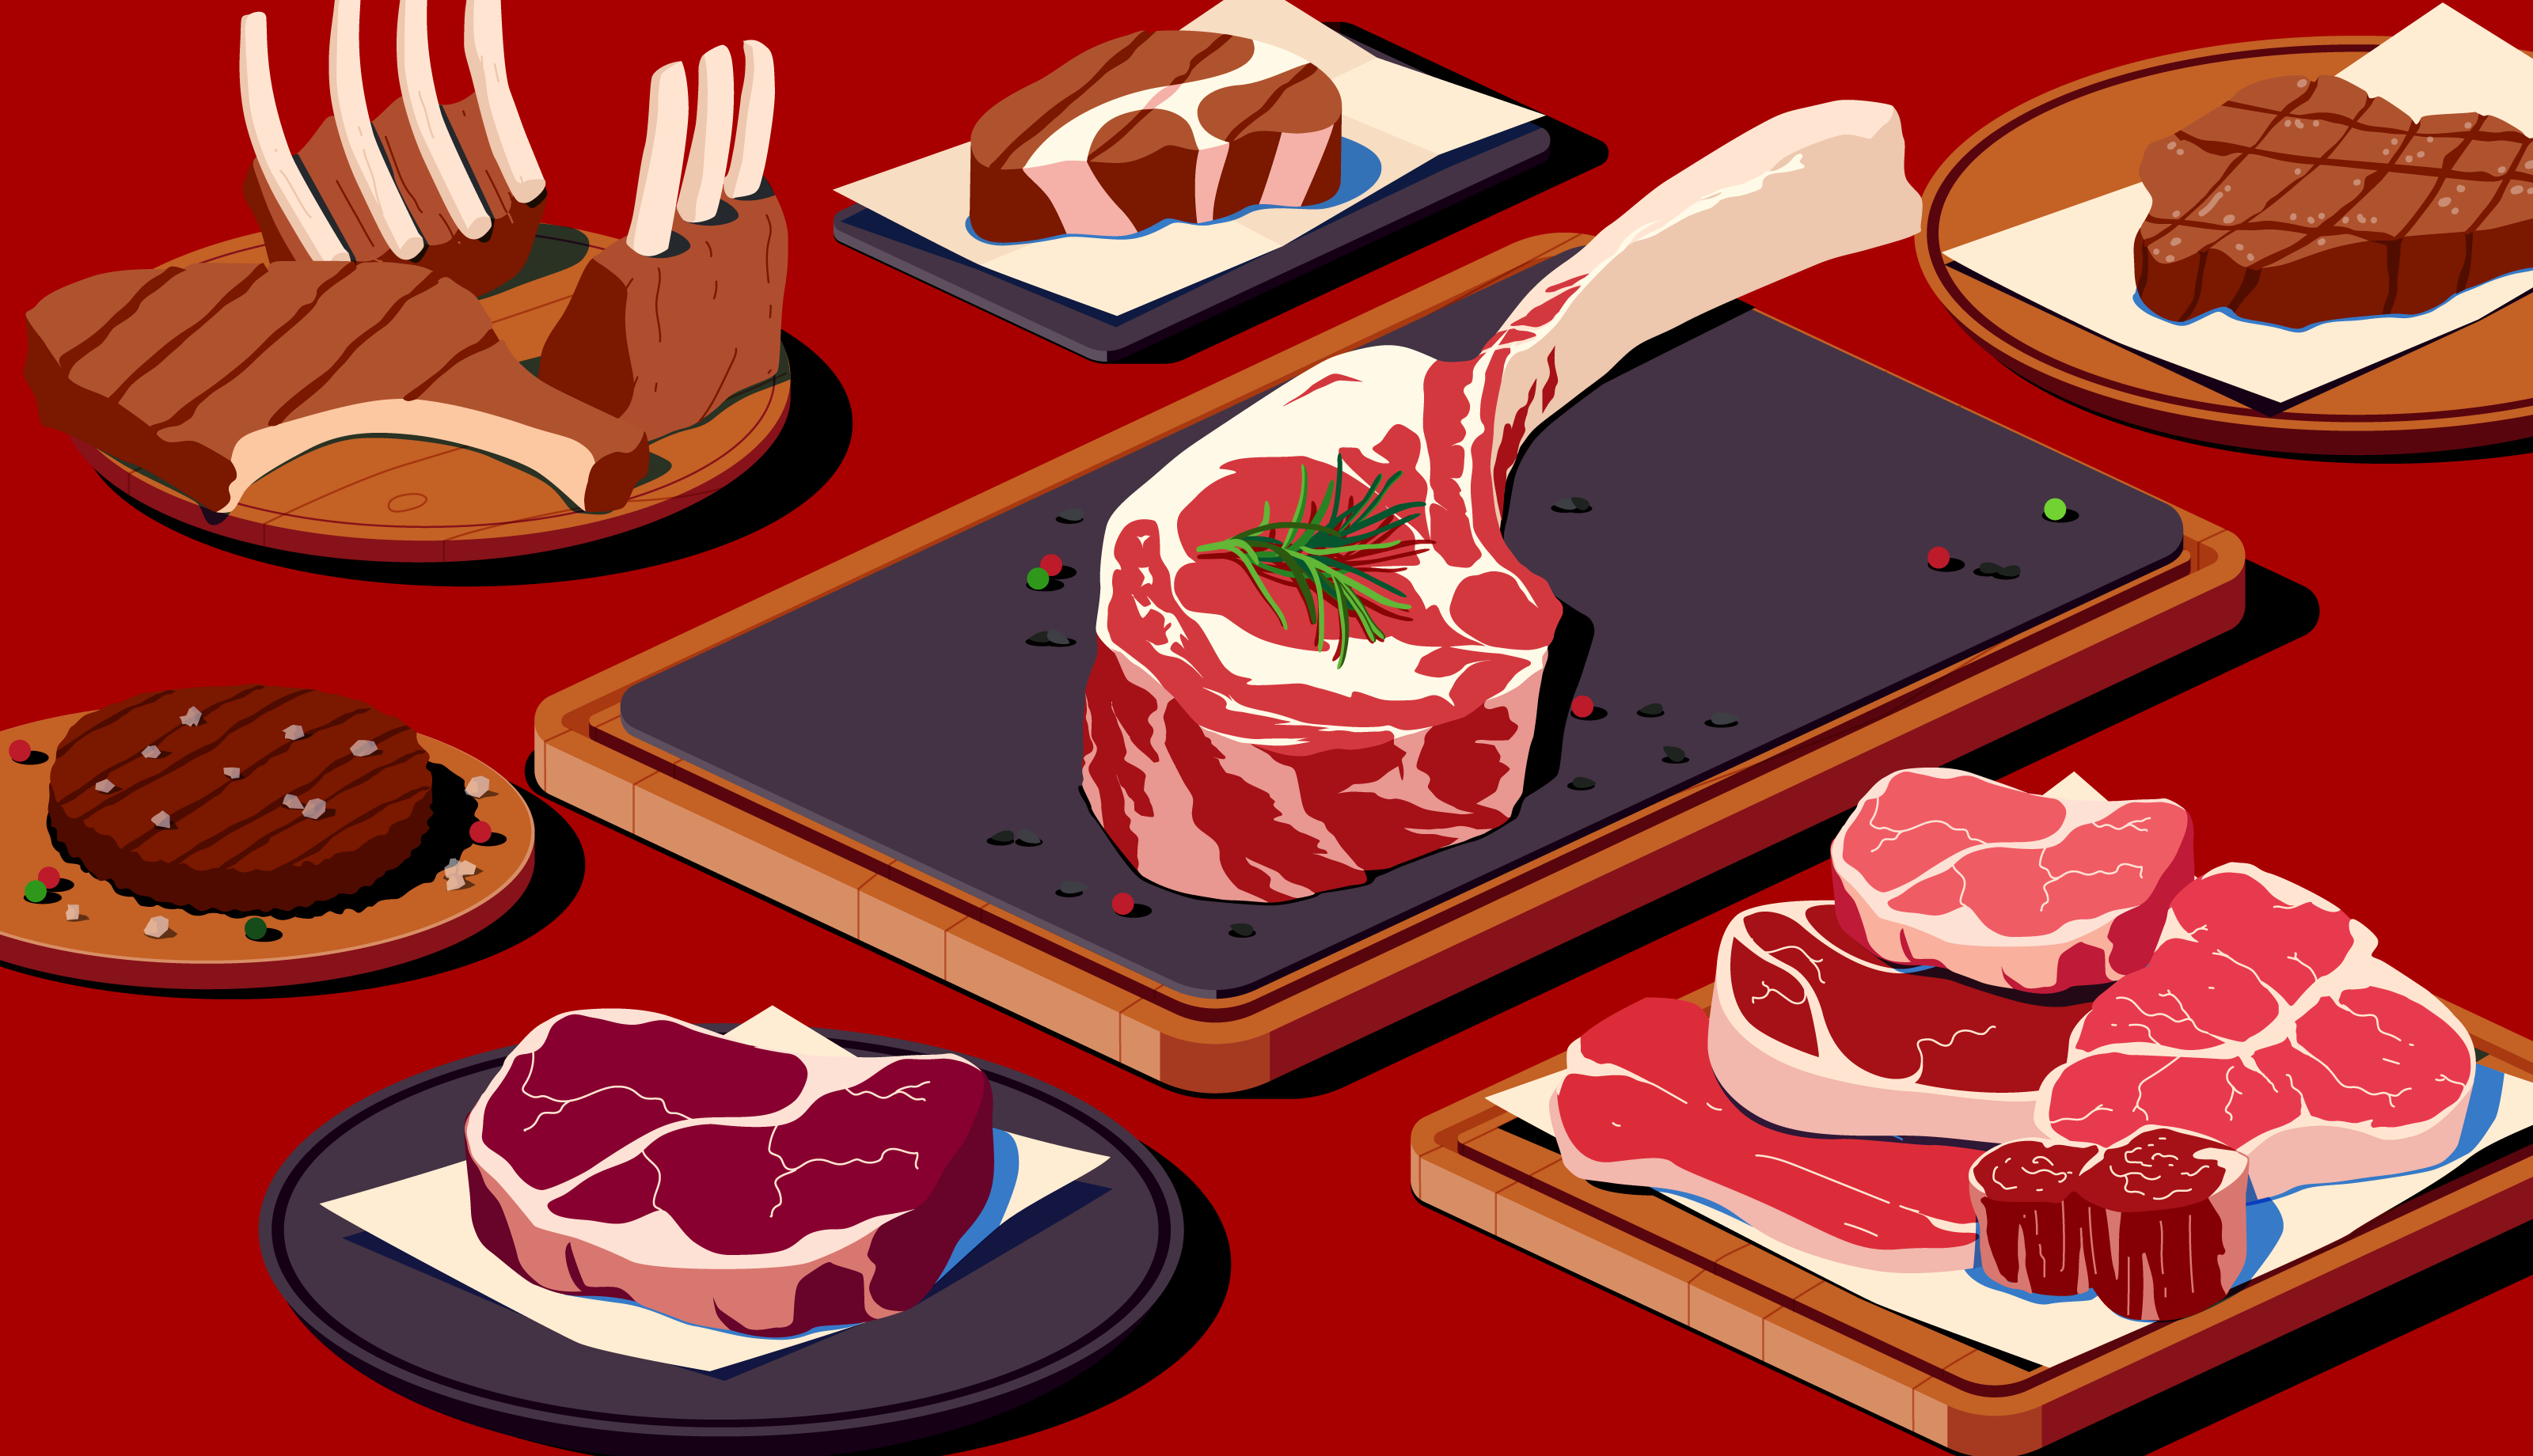 undulate erotisk brochure The Link Between Red Meat, Processed Meat And Bowel Cancer Risk